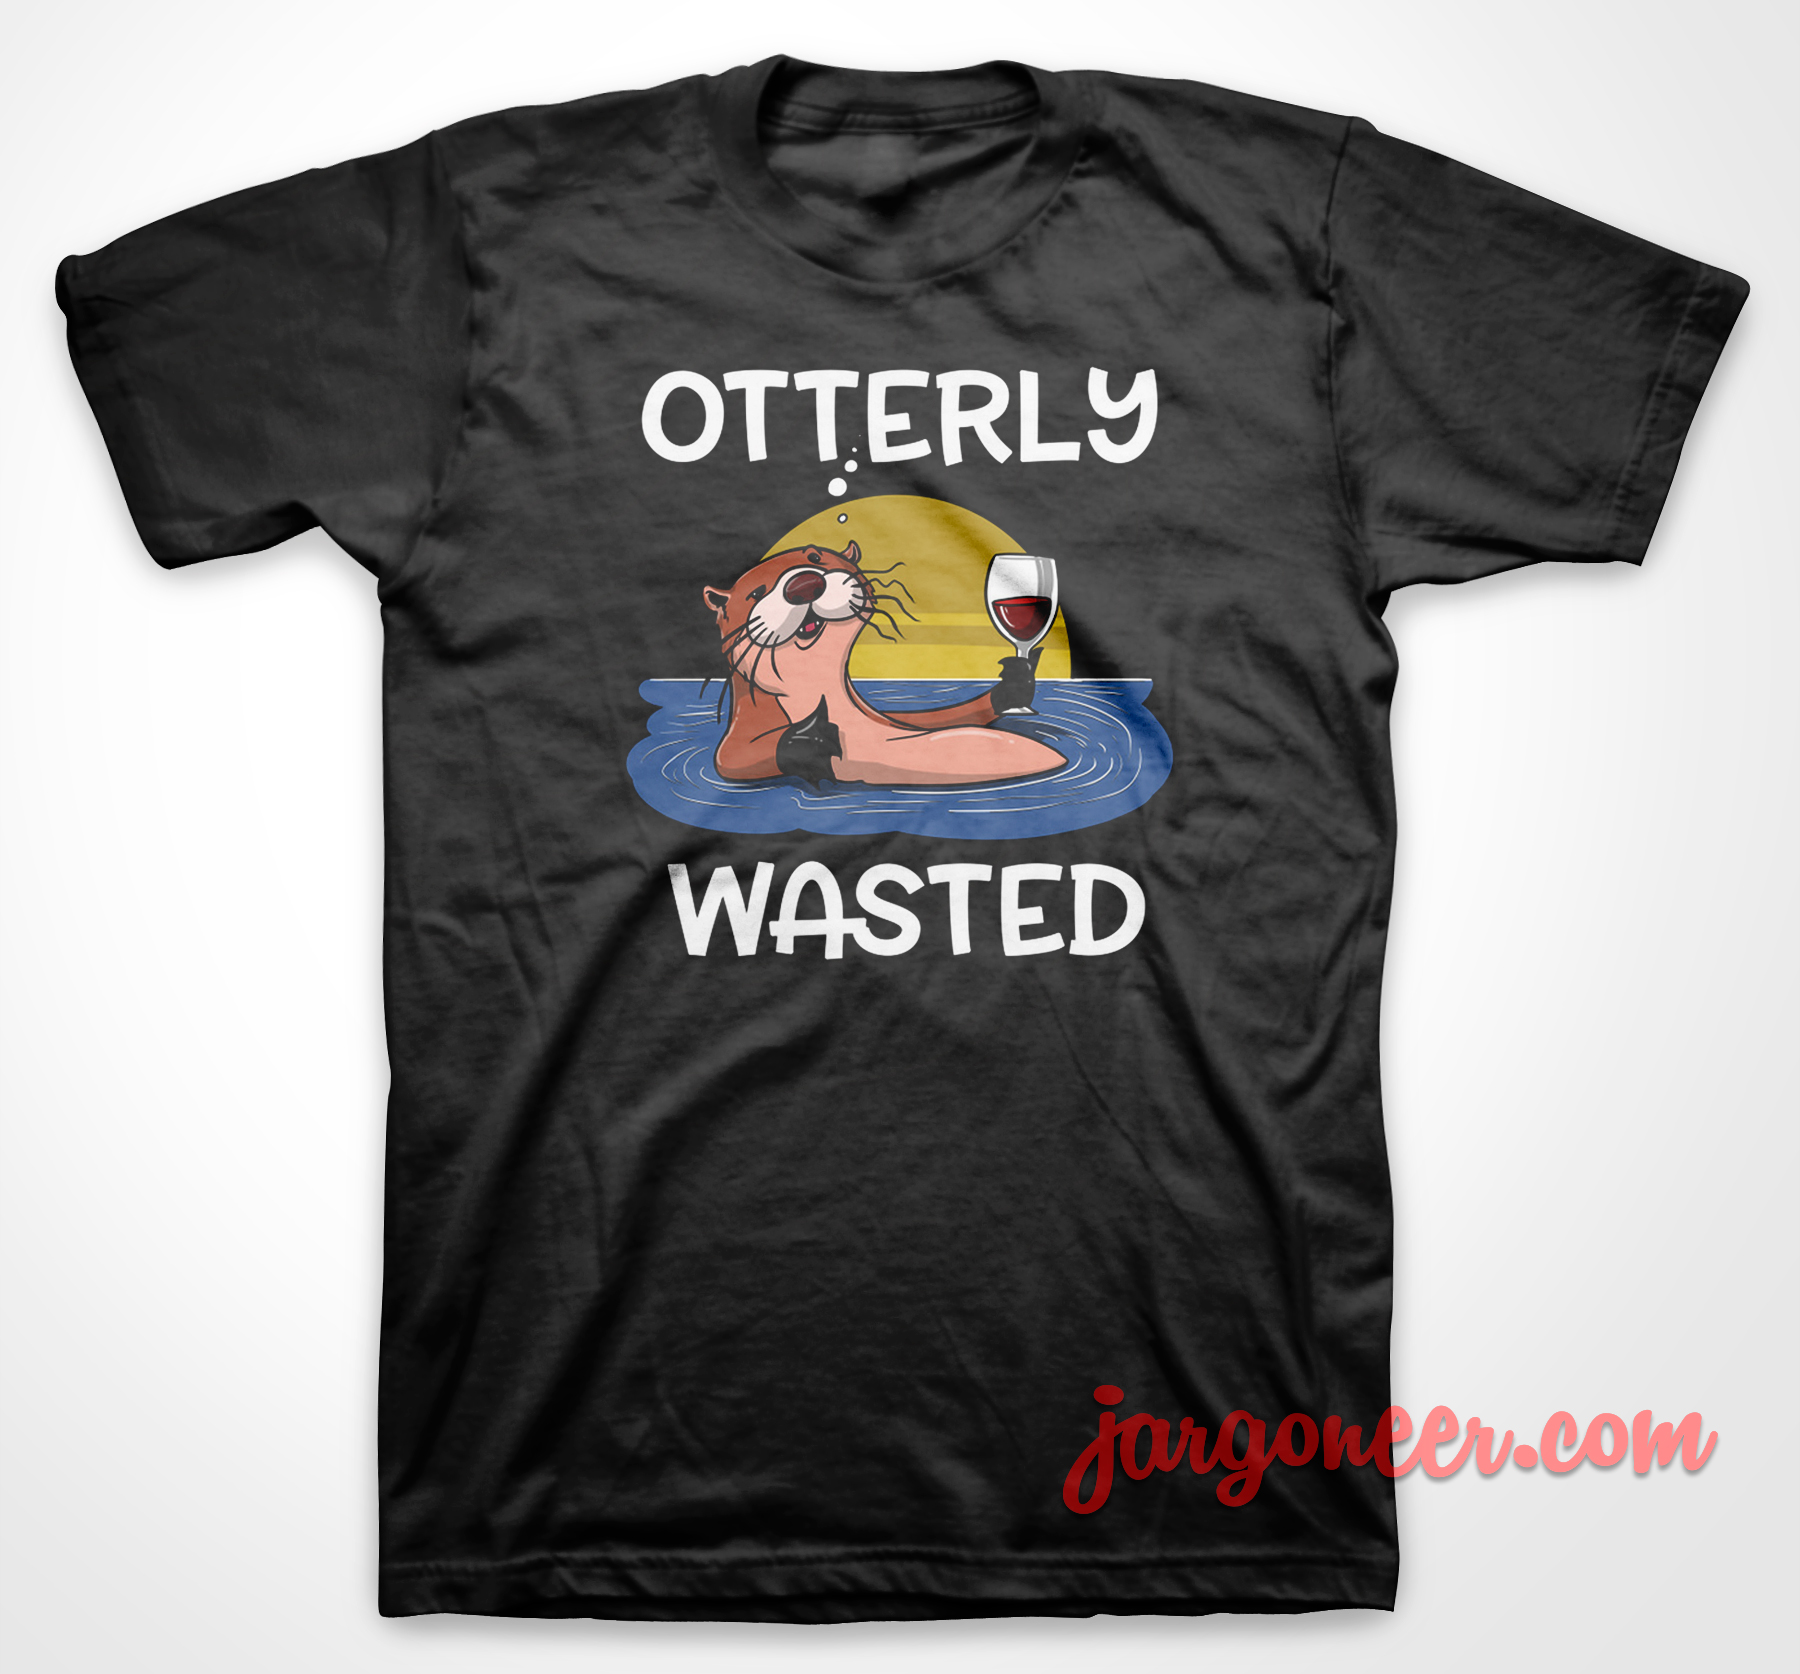 Otterly Wasted - Shop Unique Graphic Cool Shirt Designs